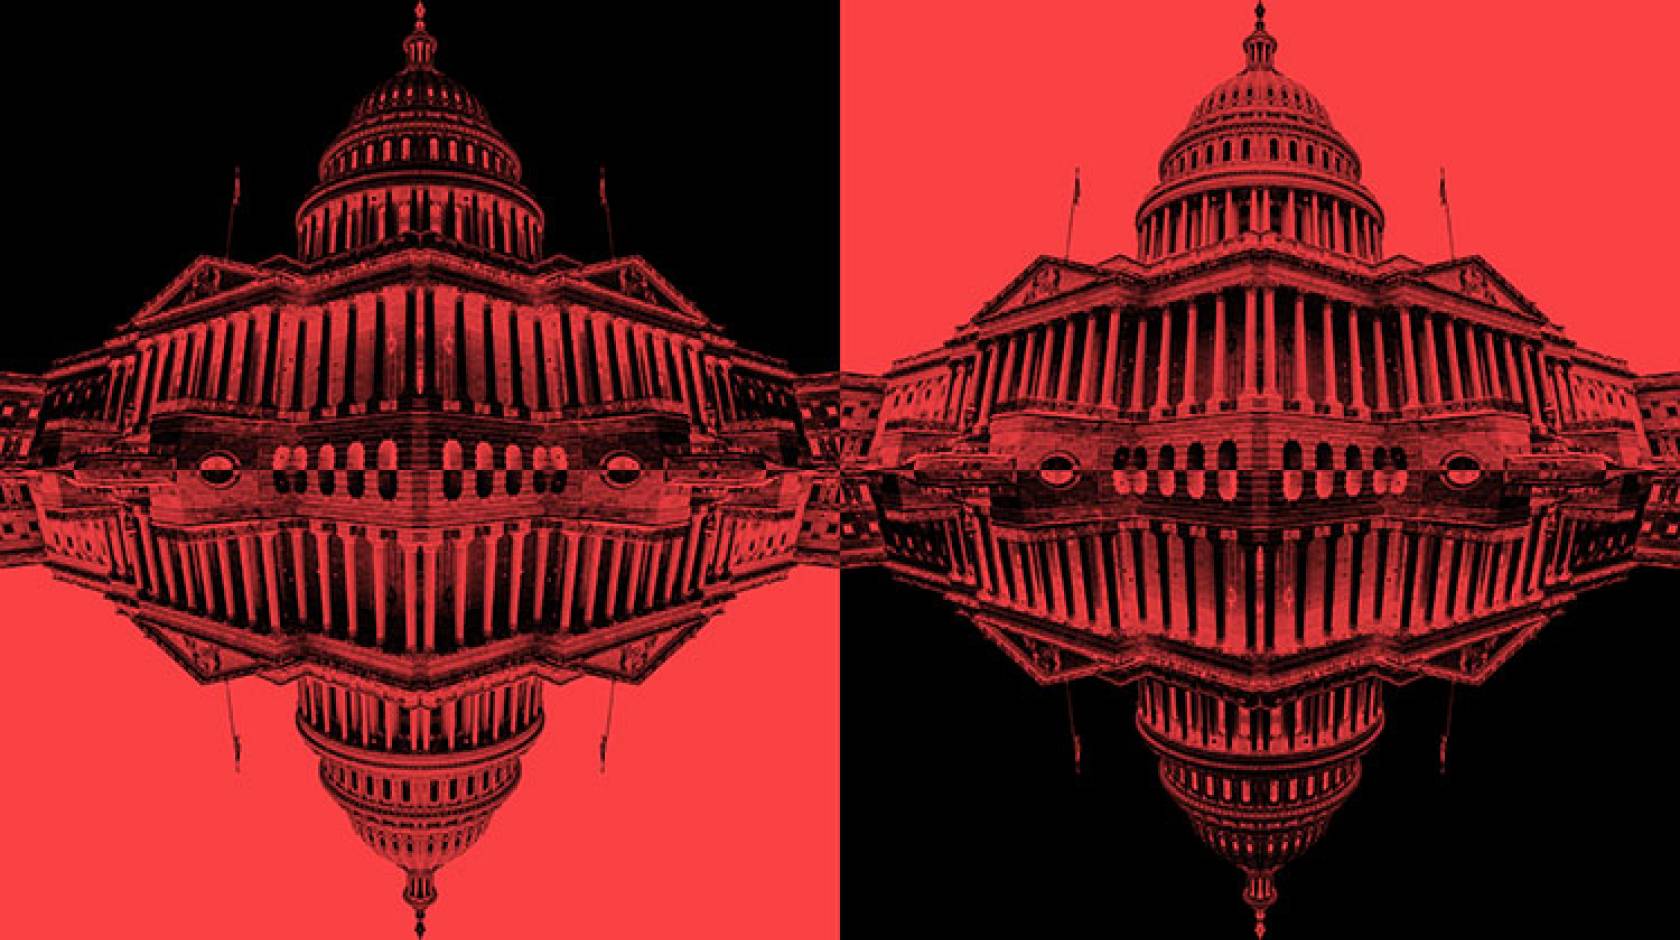 Red and black illustration of the U.S. Capitol building